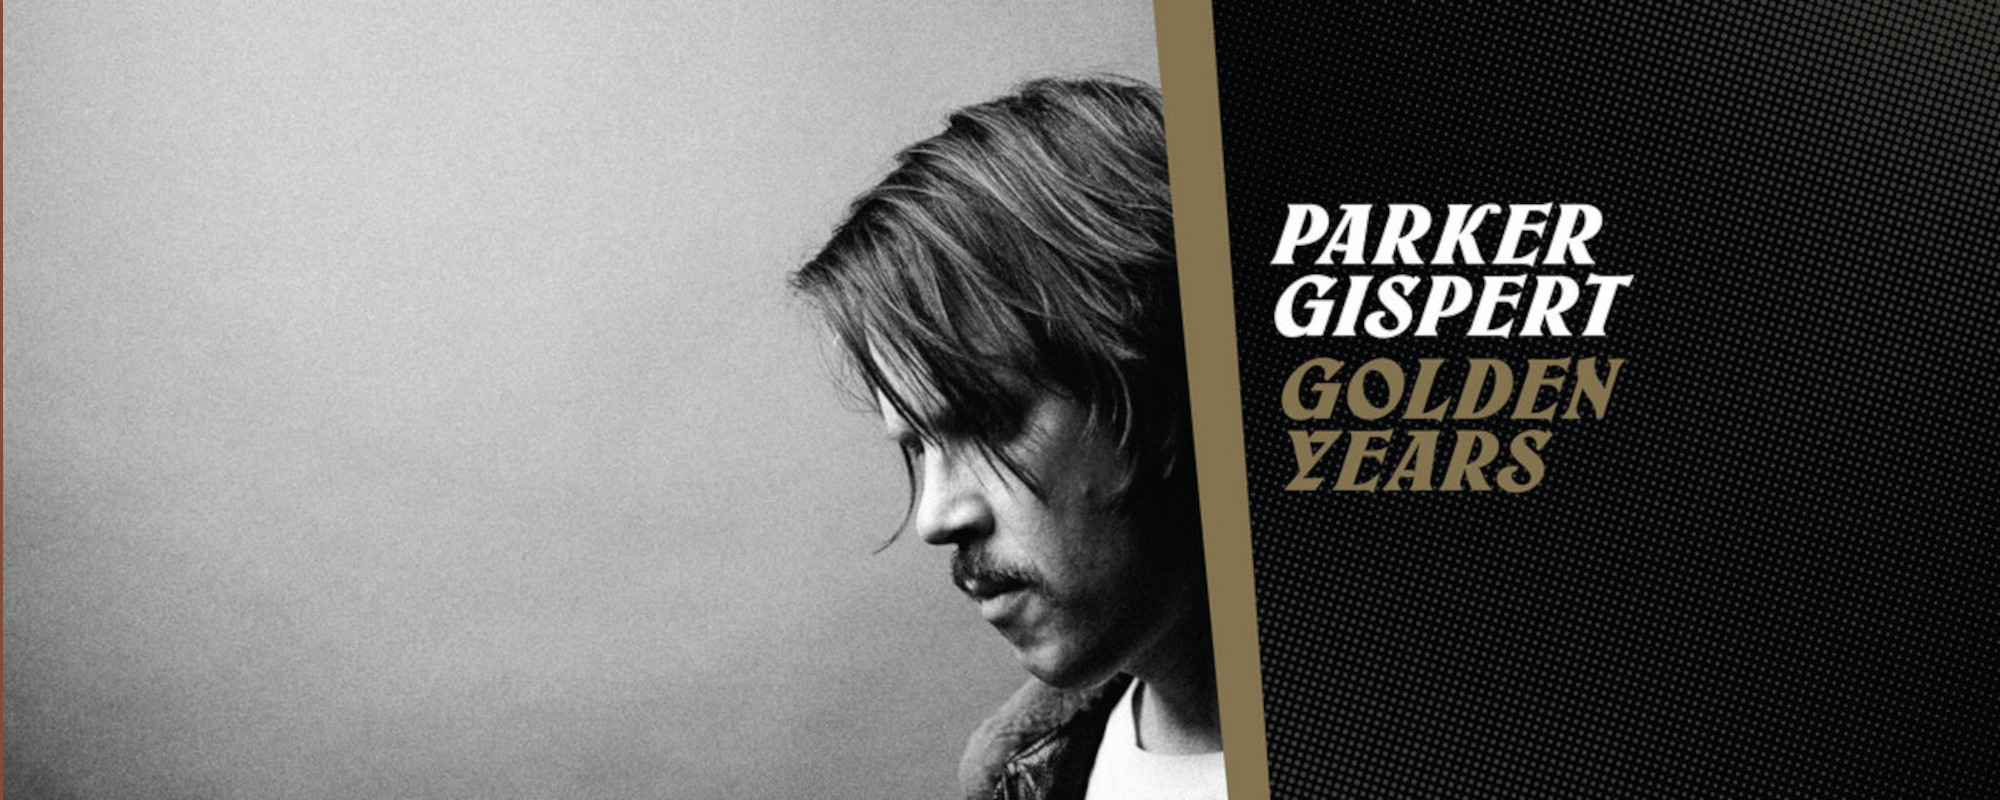 Review: A Second Substantial Solo Sojourn from Parker Gispert